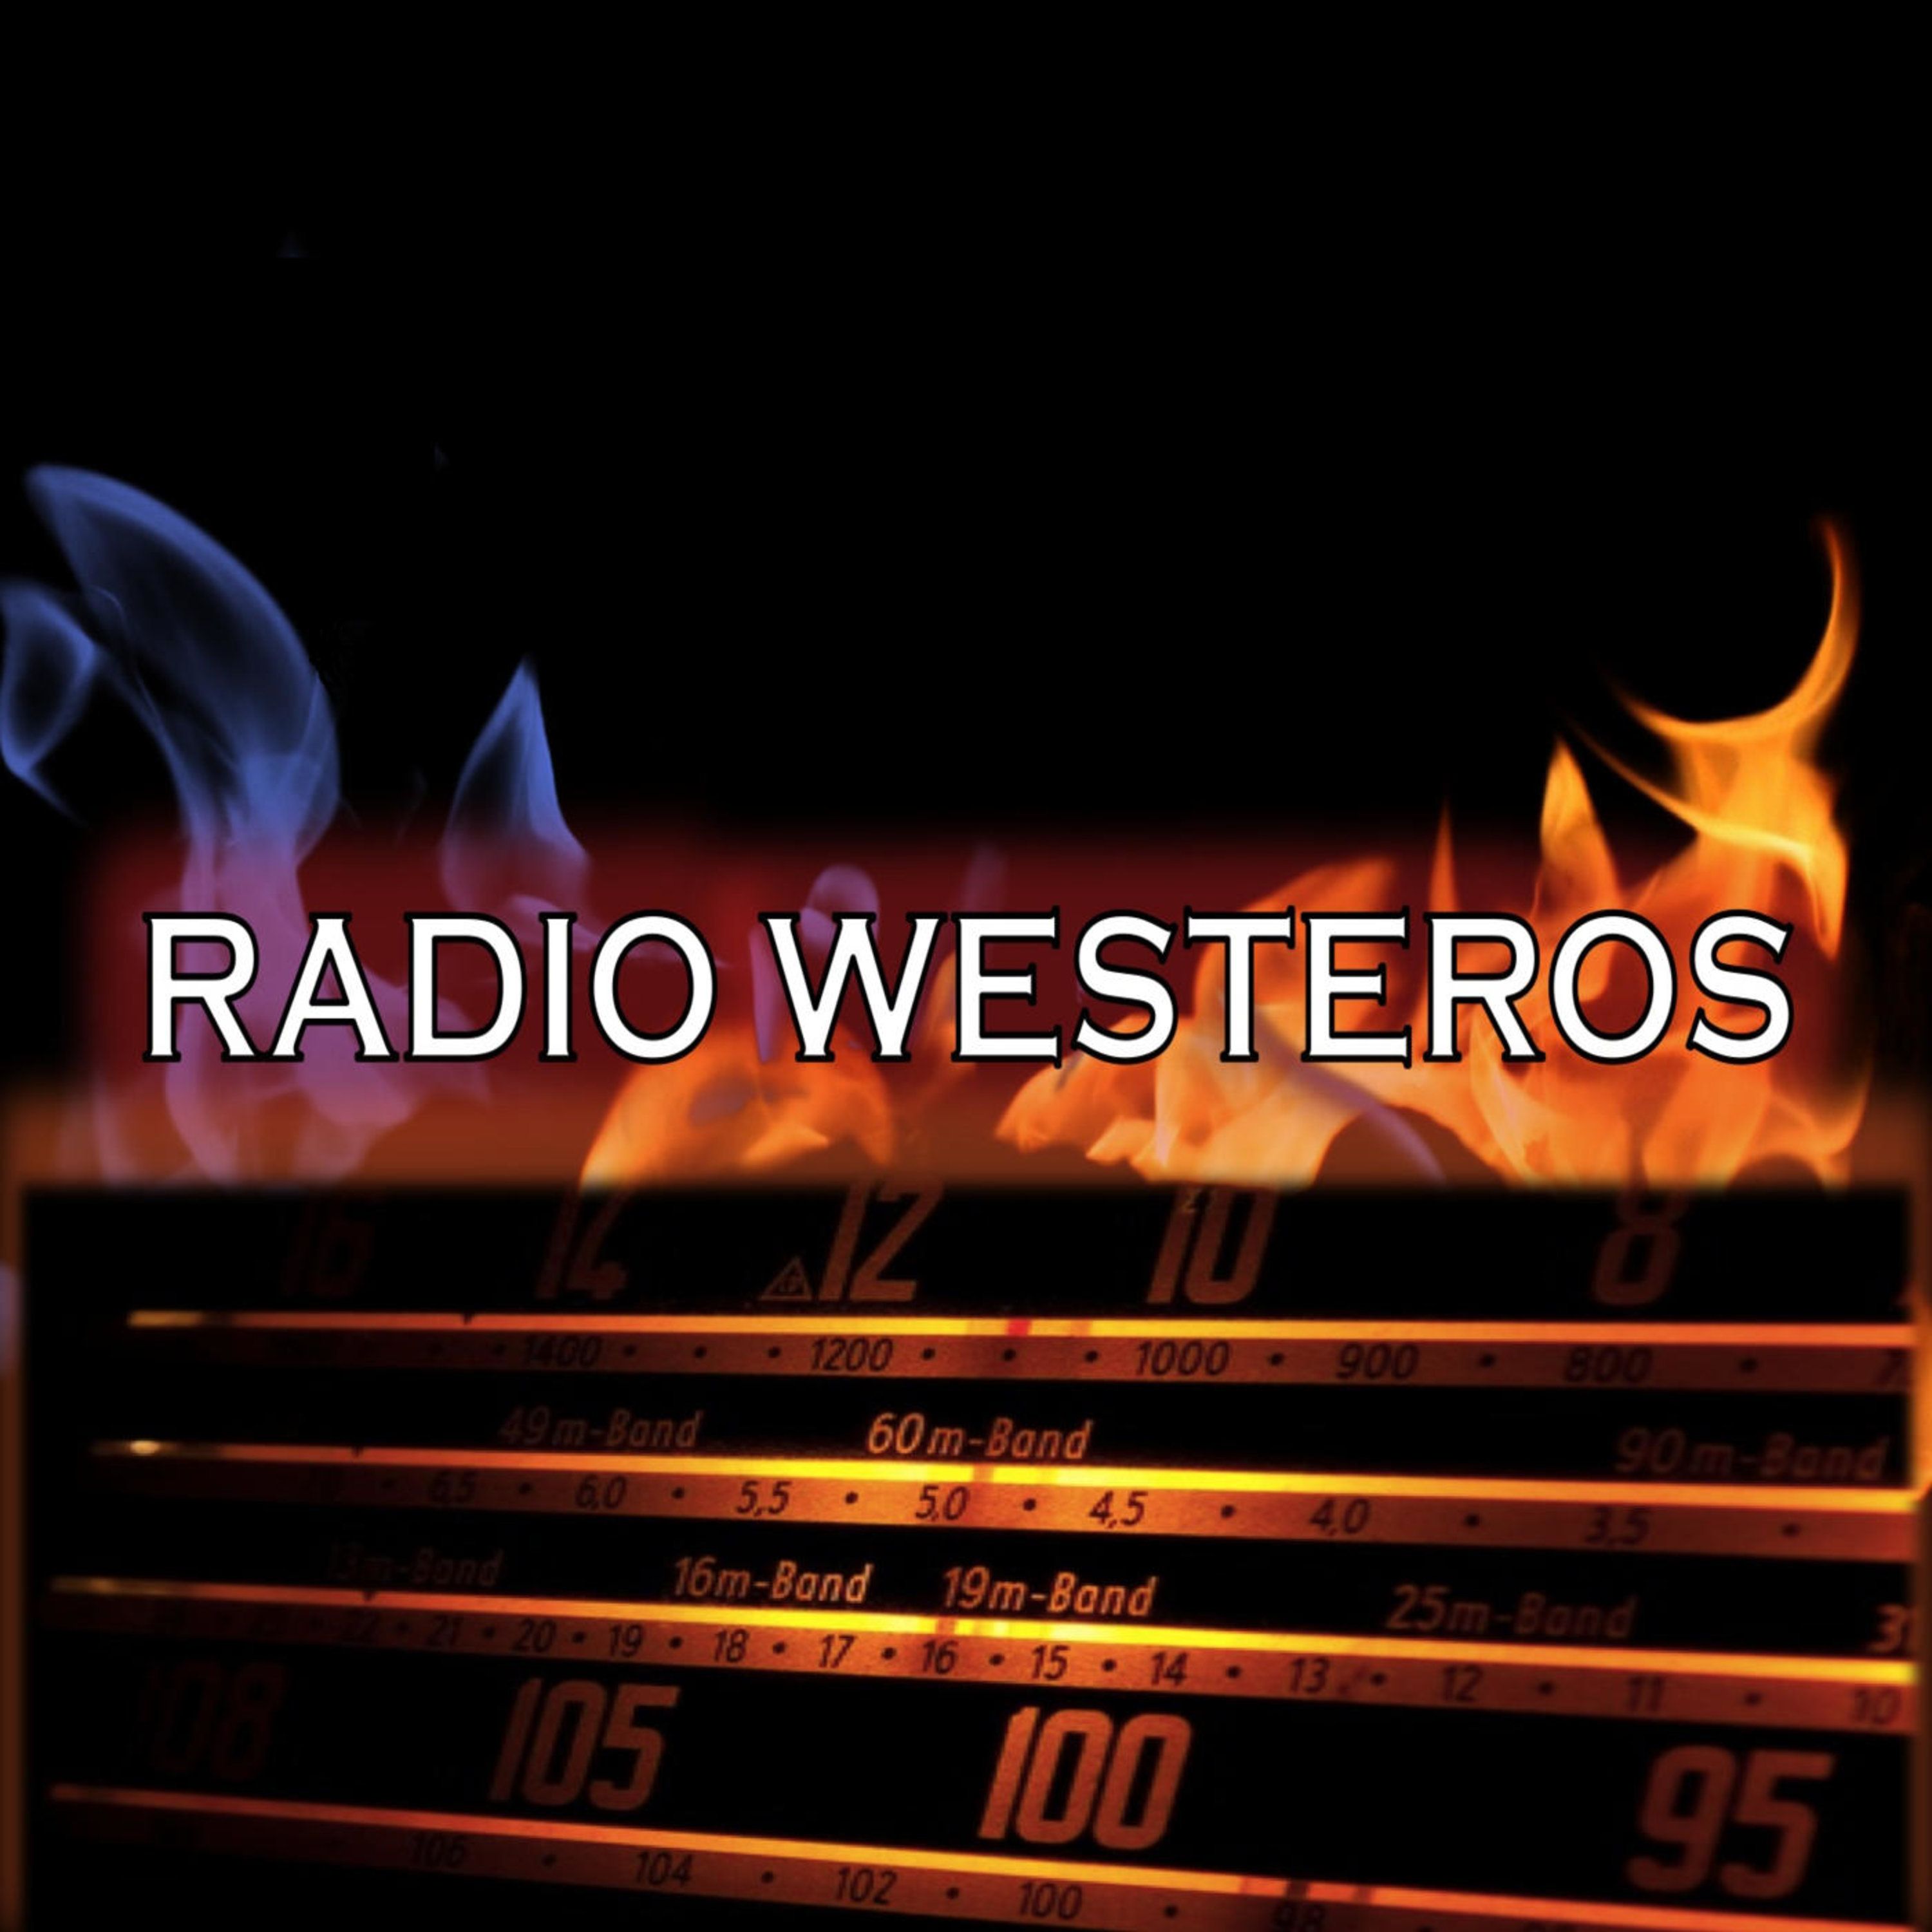 Radio Westeros Episode 37 War of the Five Kings, part 3 - And Then There Was One